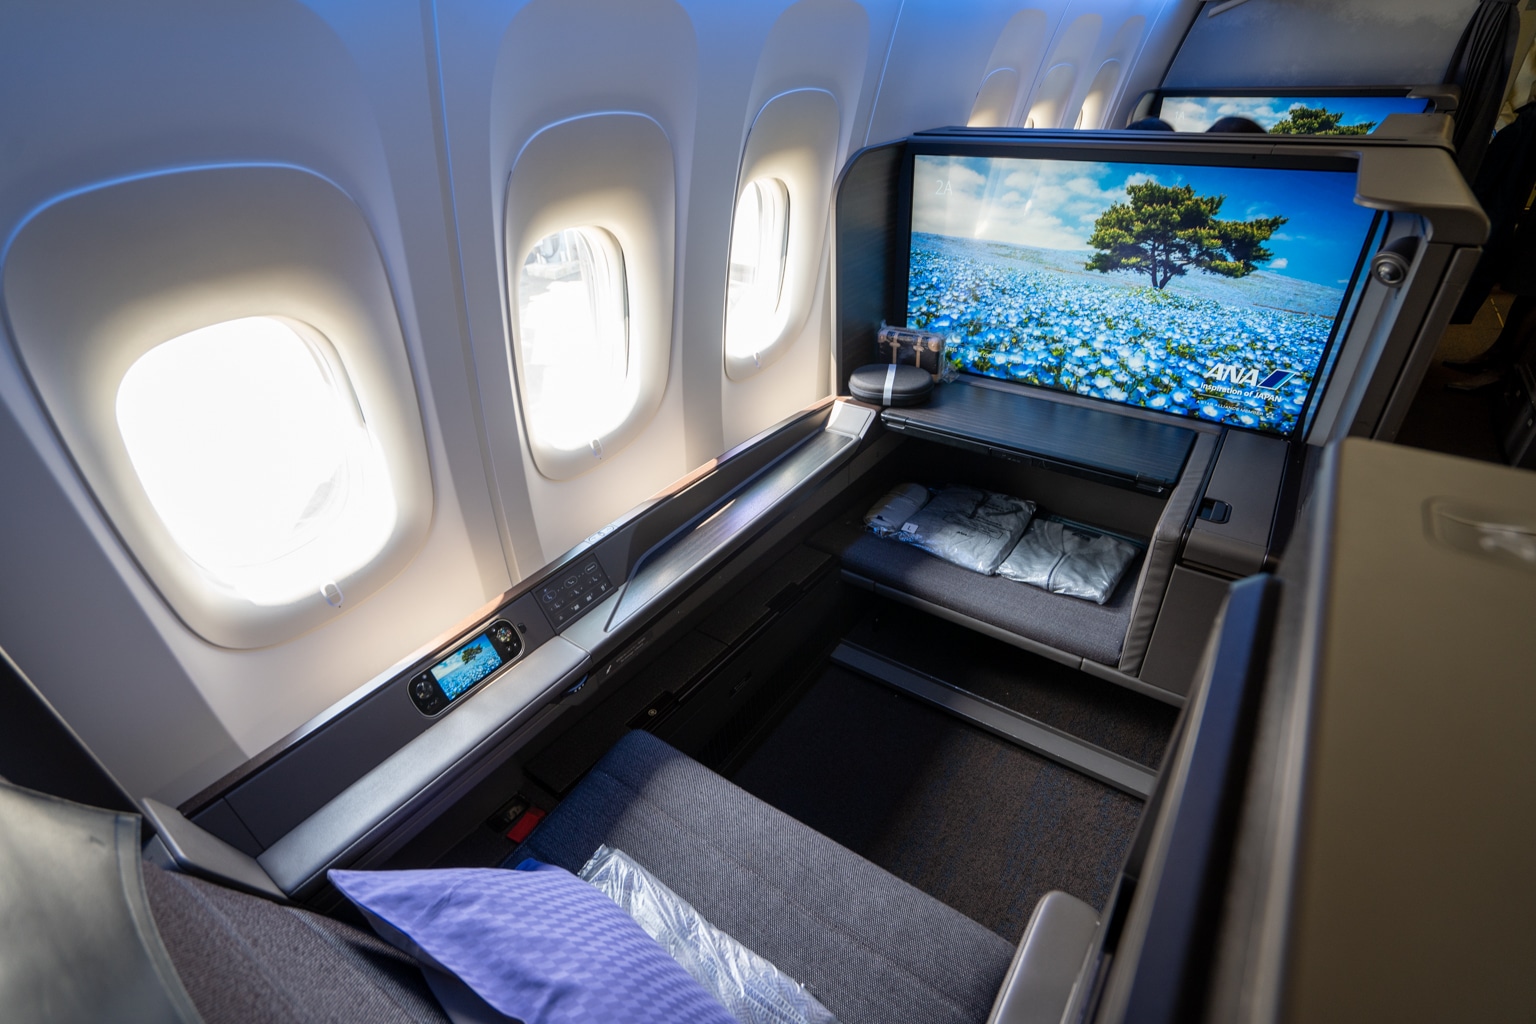 Review: ANA New First Class Tokyo to New York